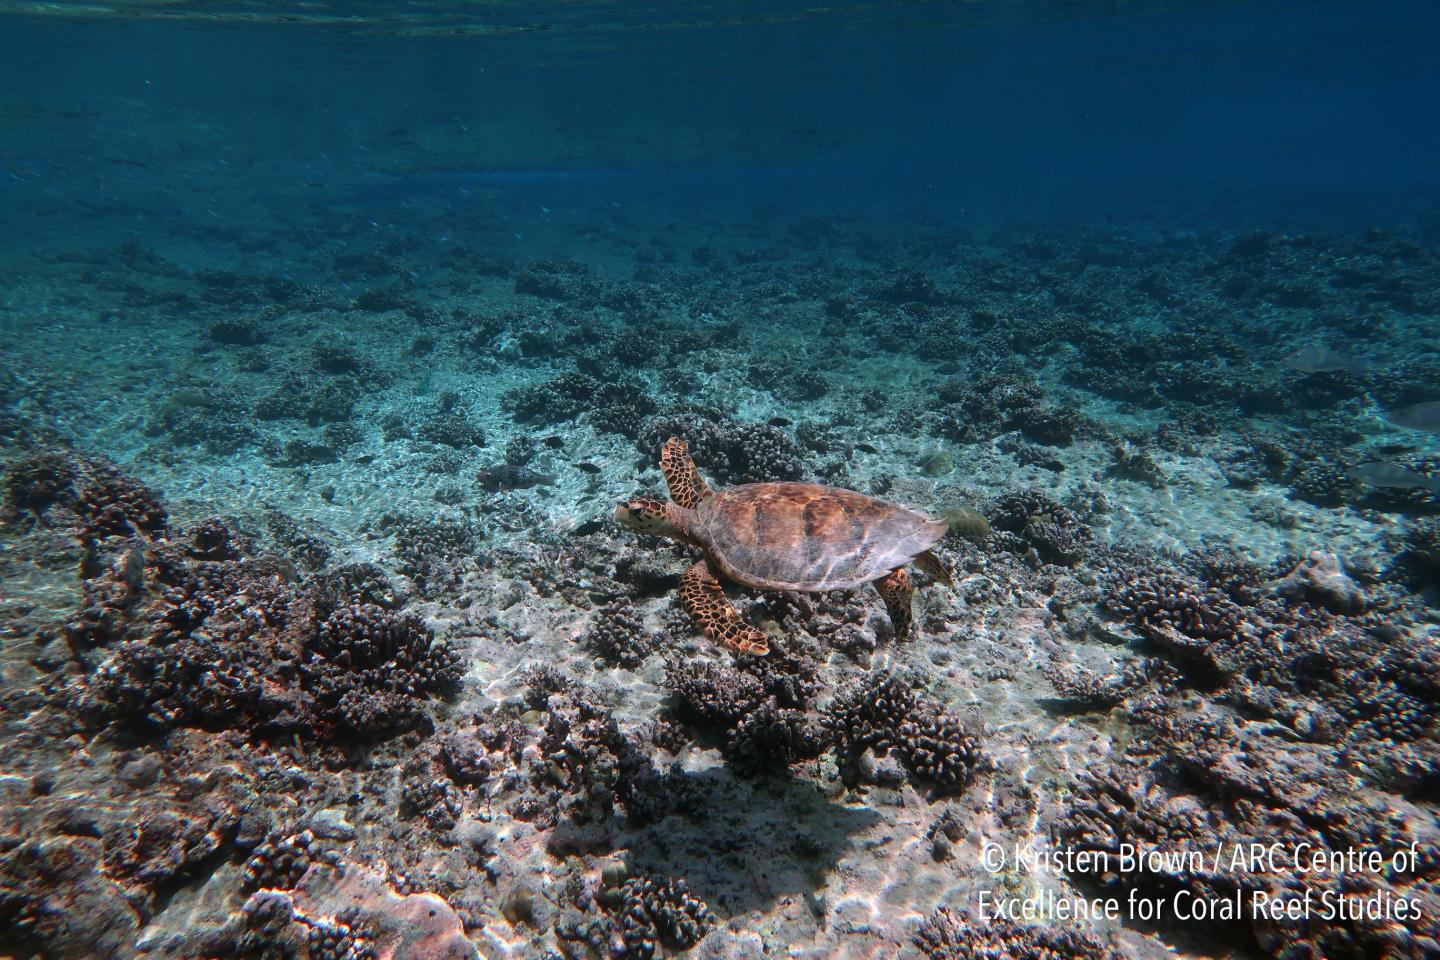 Coasts drown as coral reefs collapse under warming & acidification